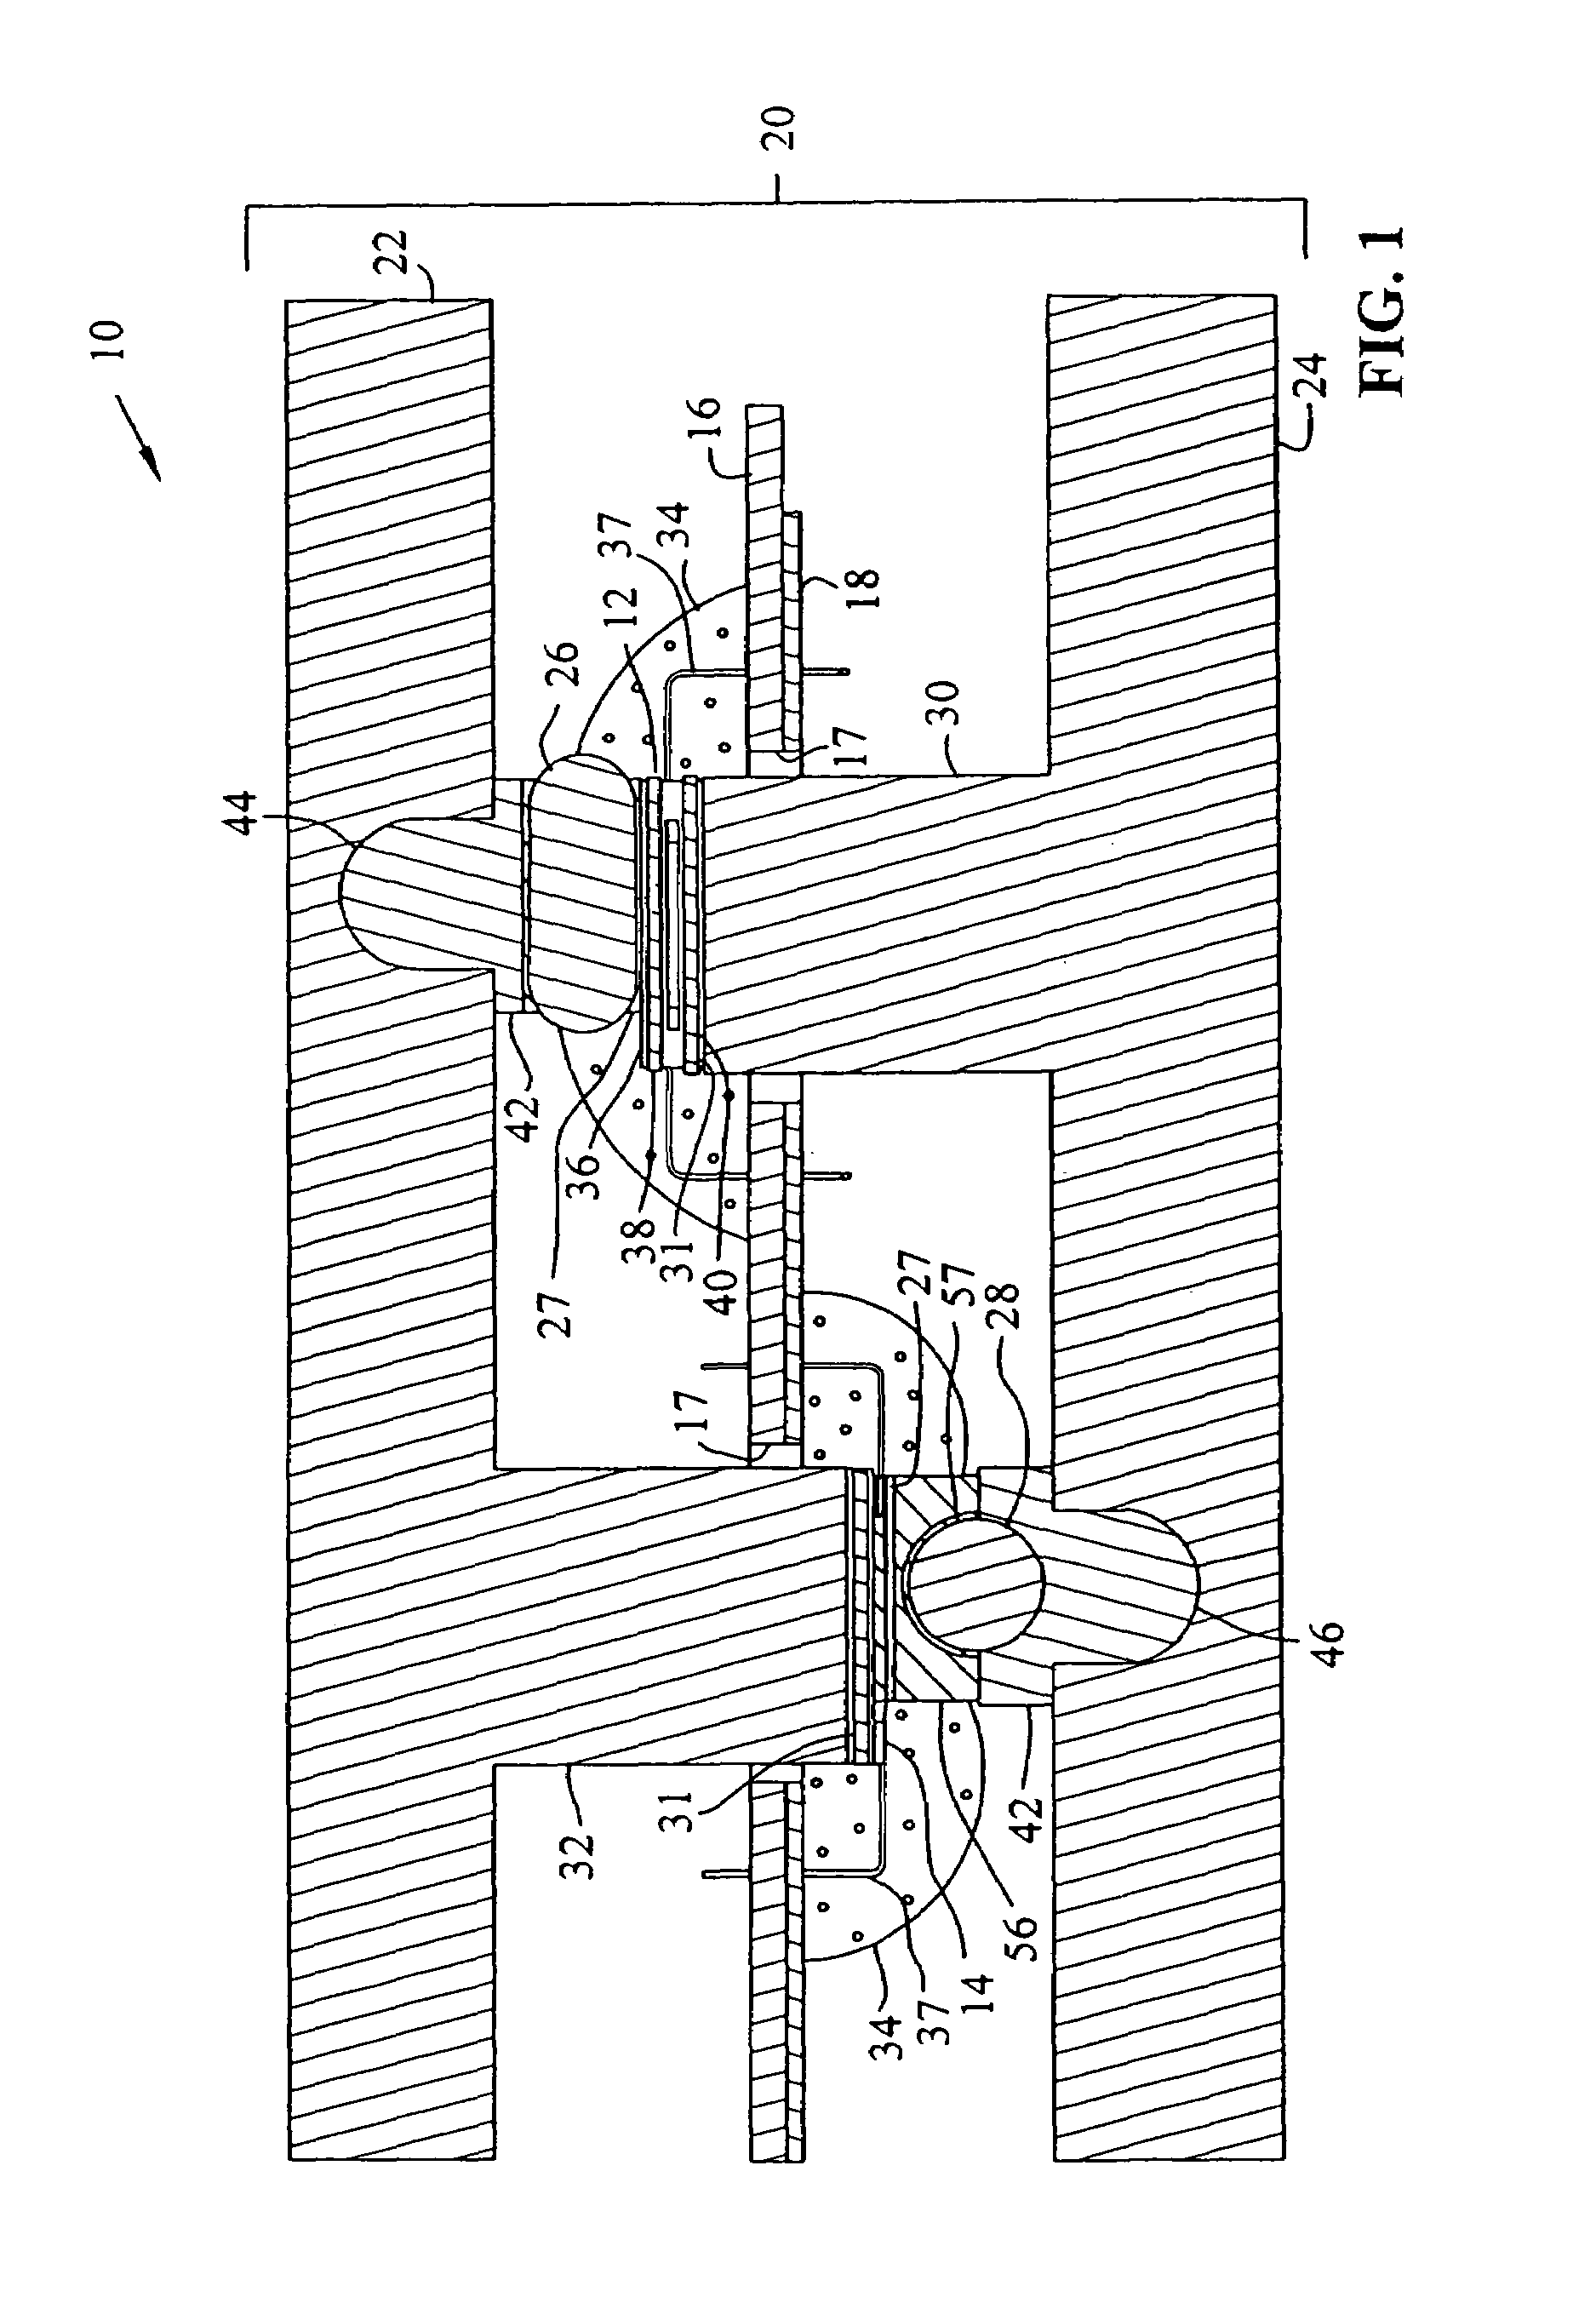 Power electronic system with passive cooling